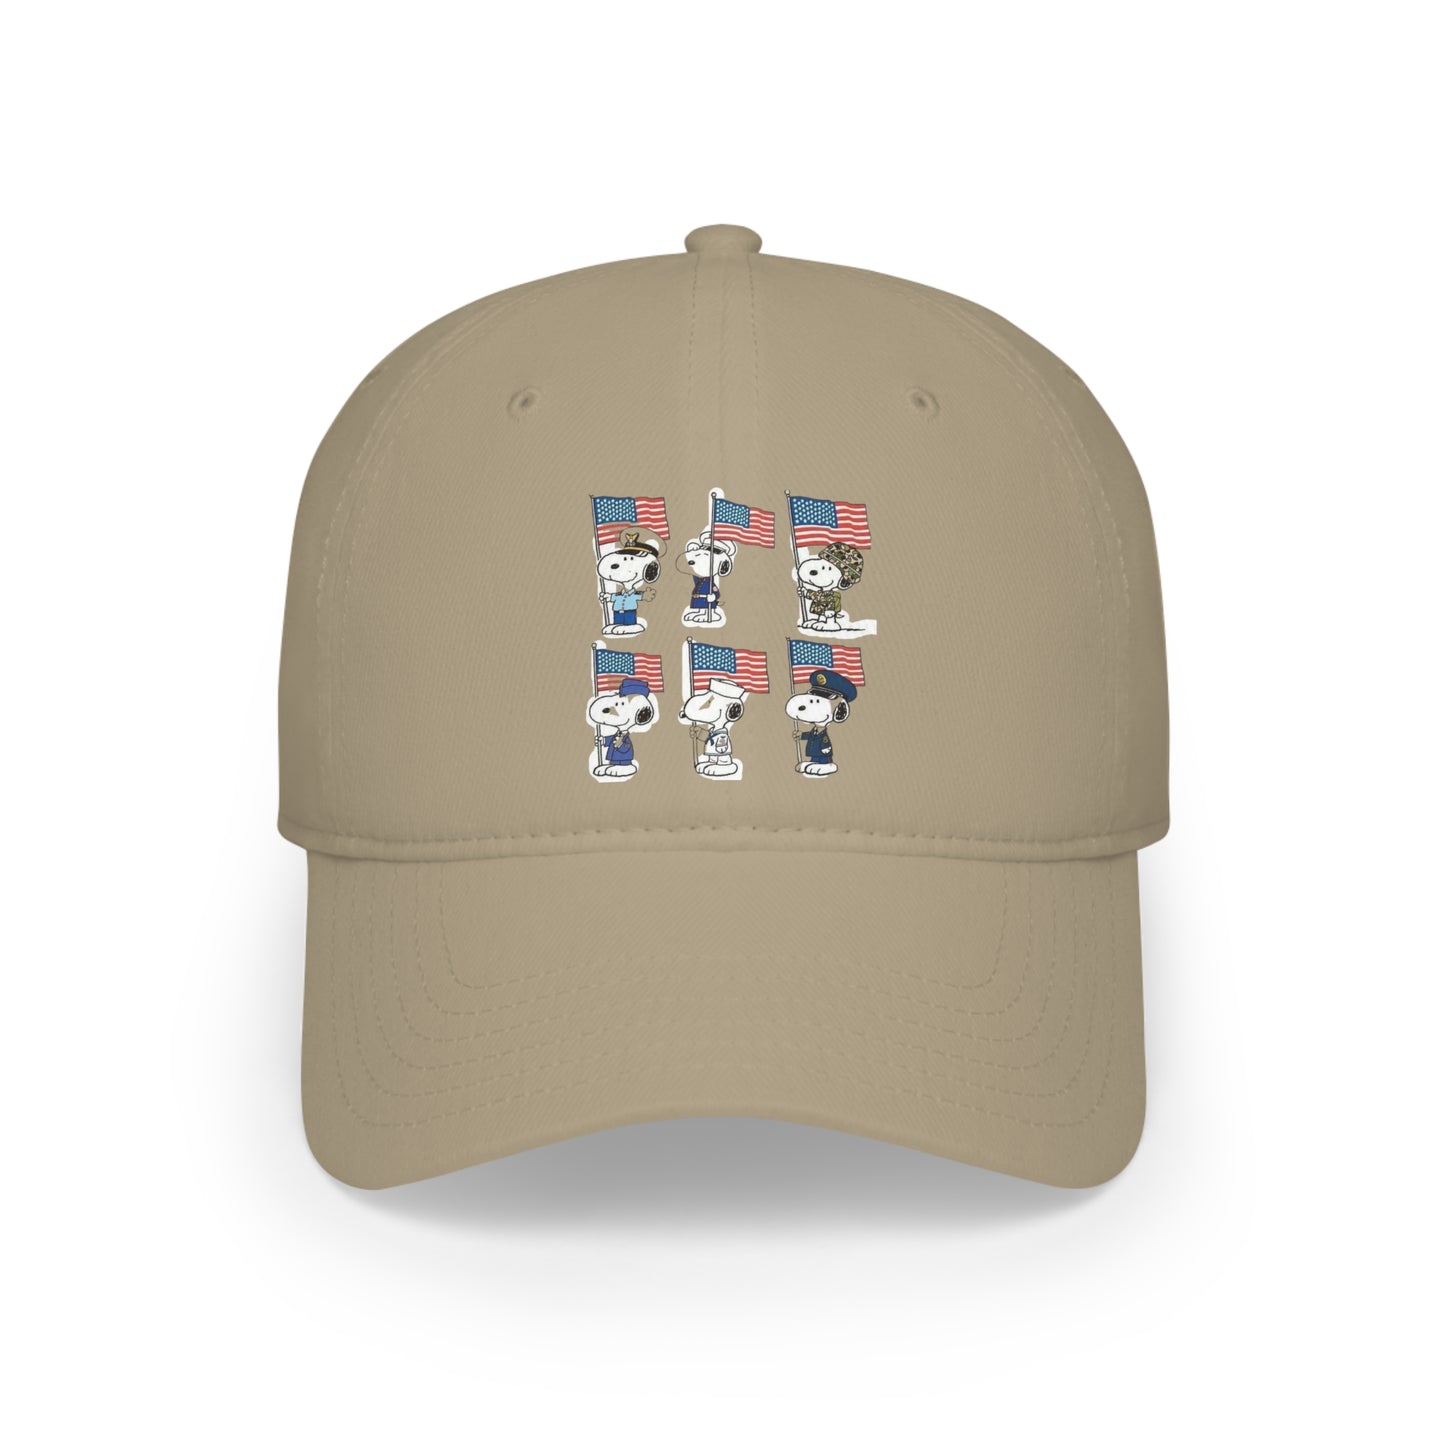 Veterans Day / Armed Services / Military / Low Profile Baseball Cap